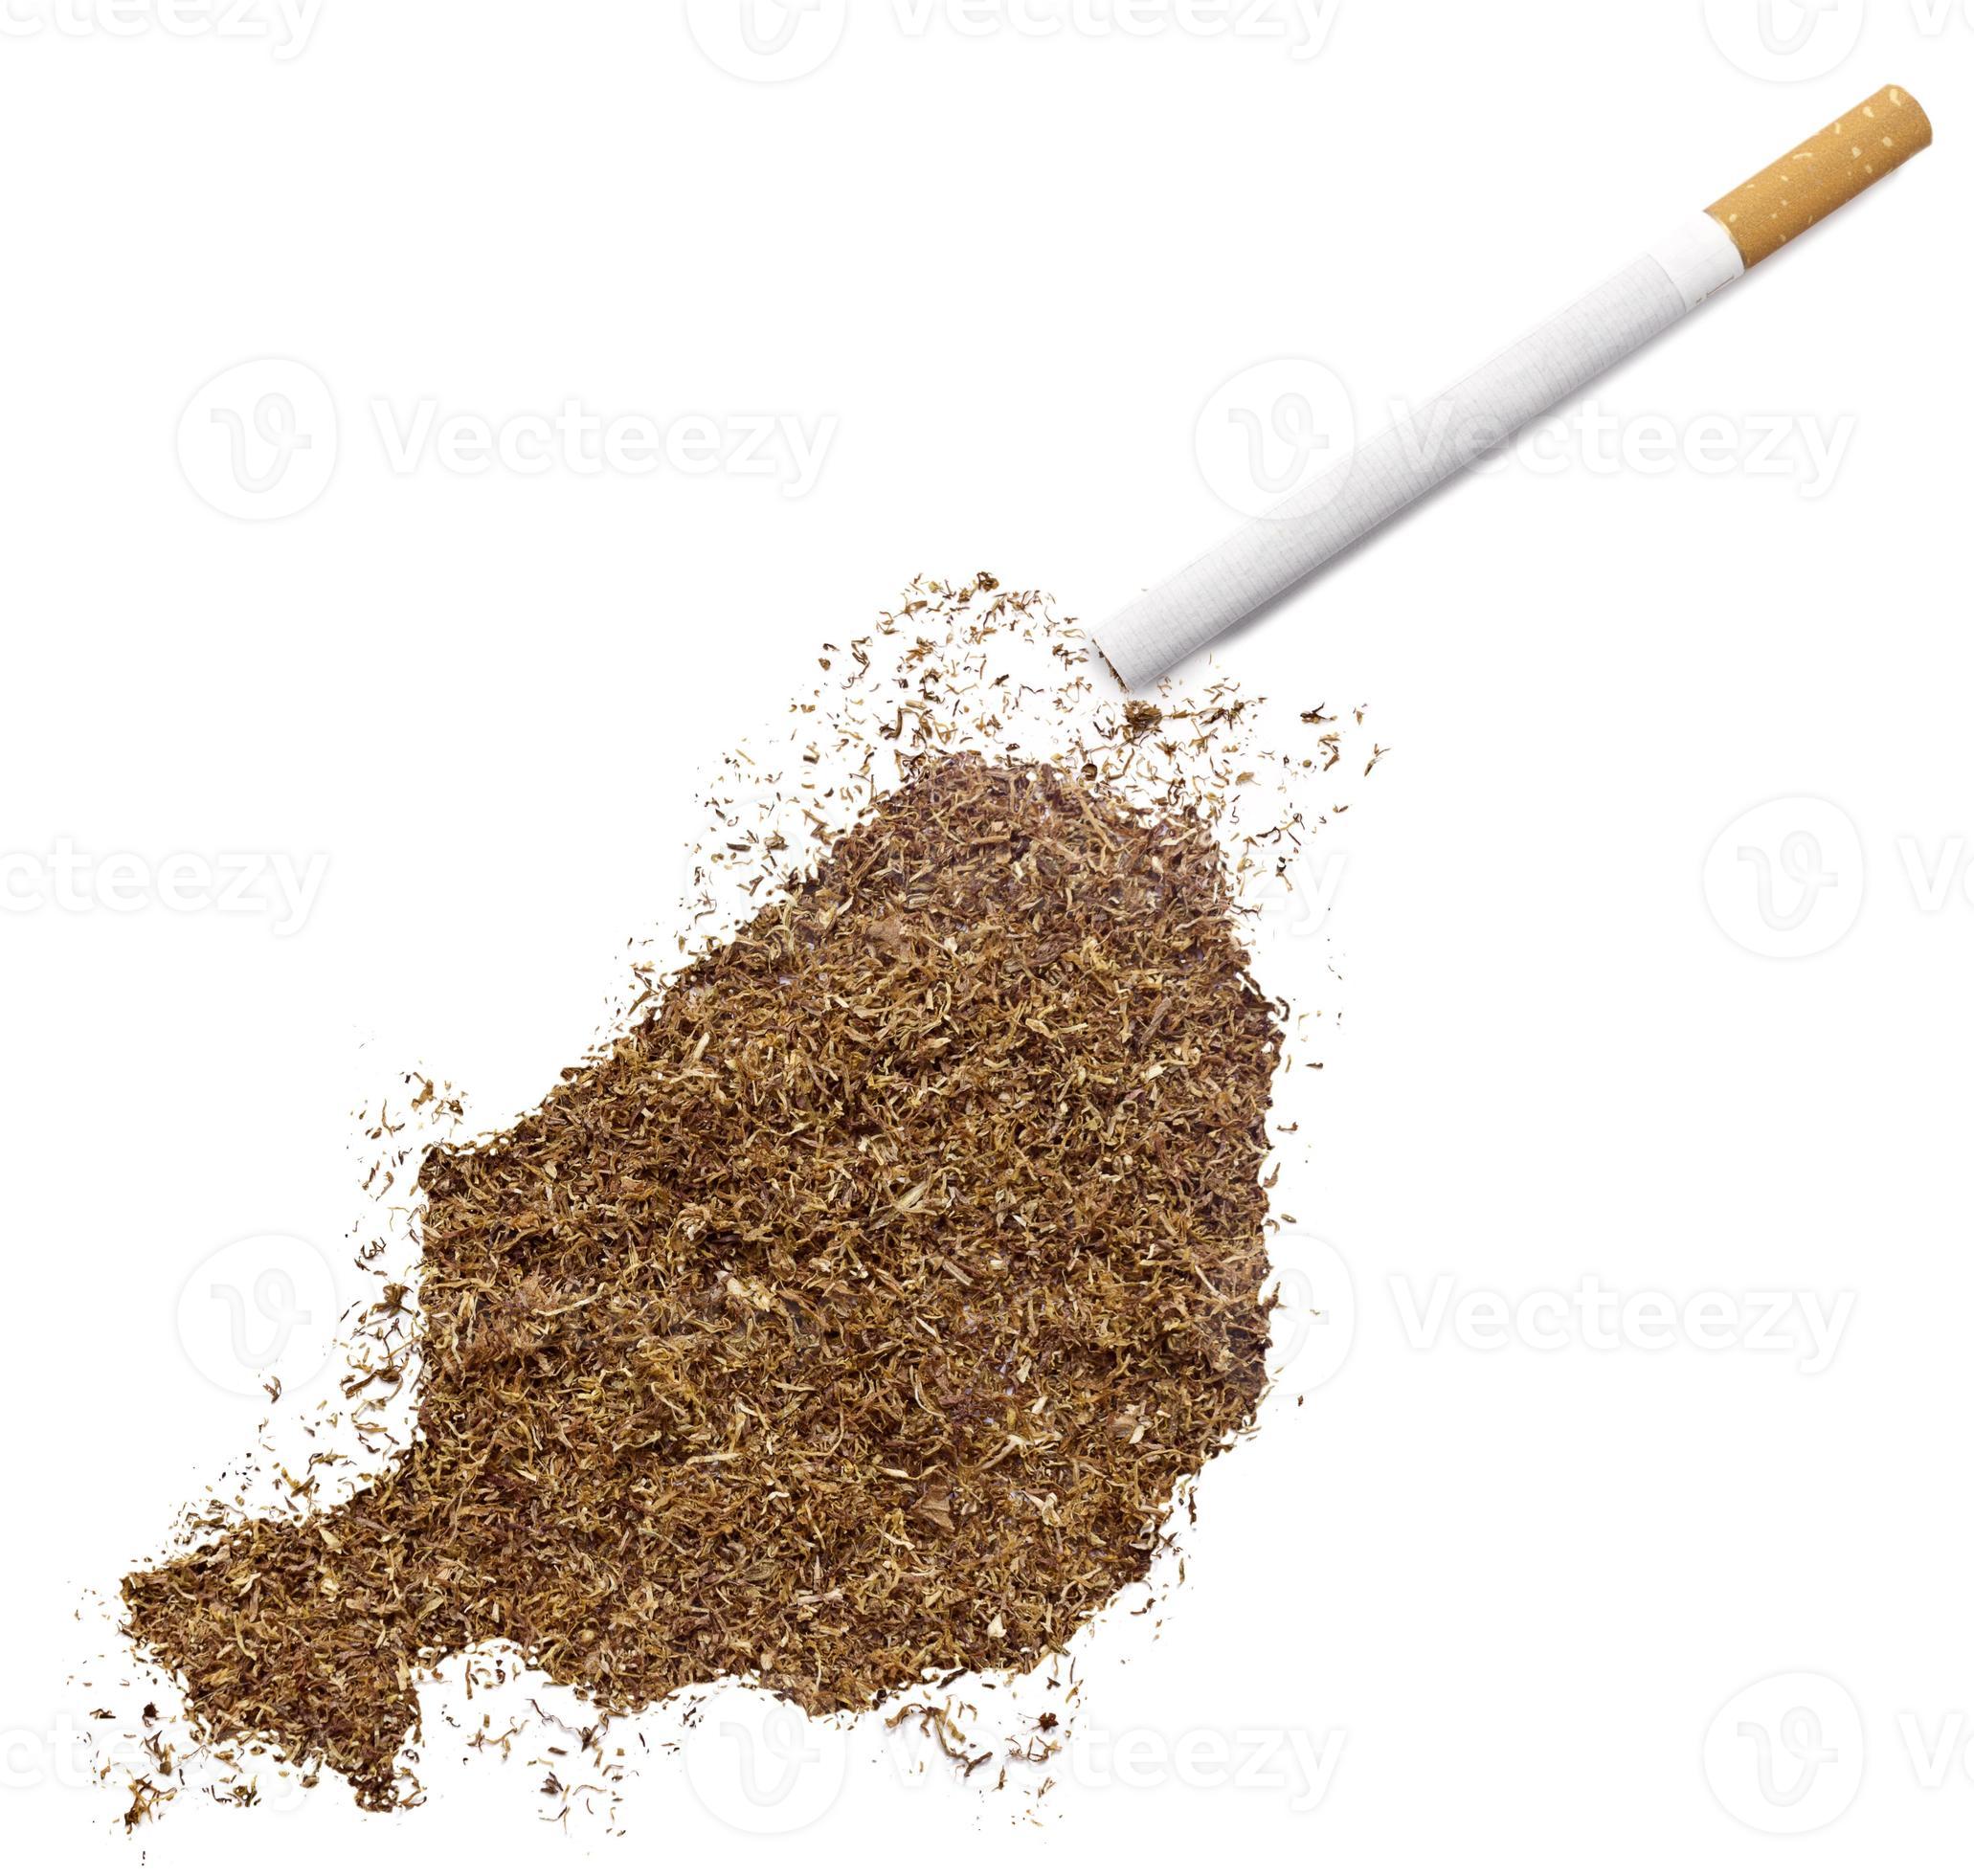 Cigarette and tobacco shaped as Niger (series) photo